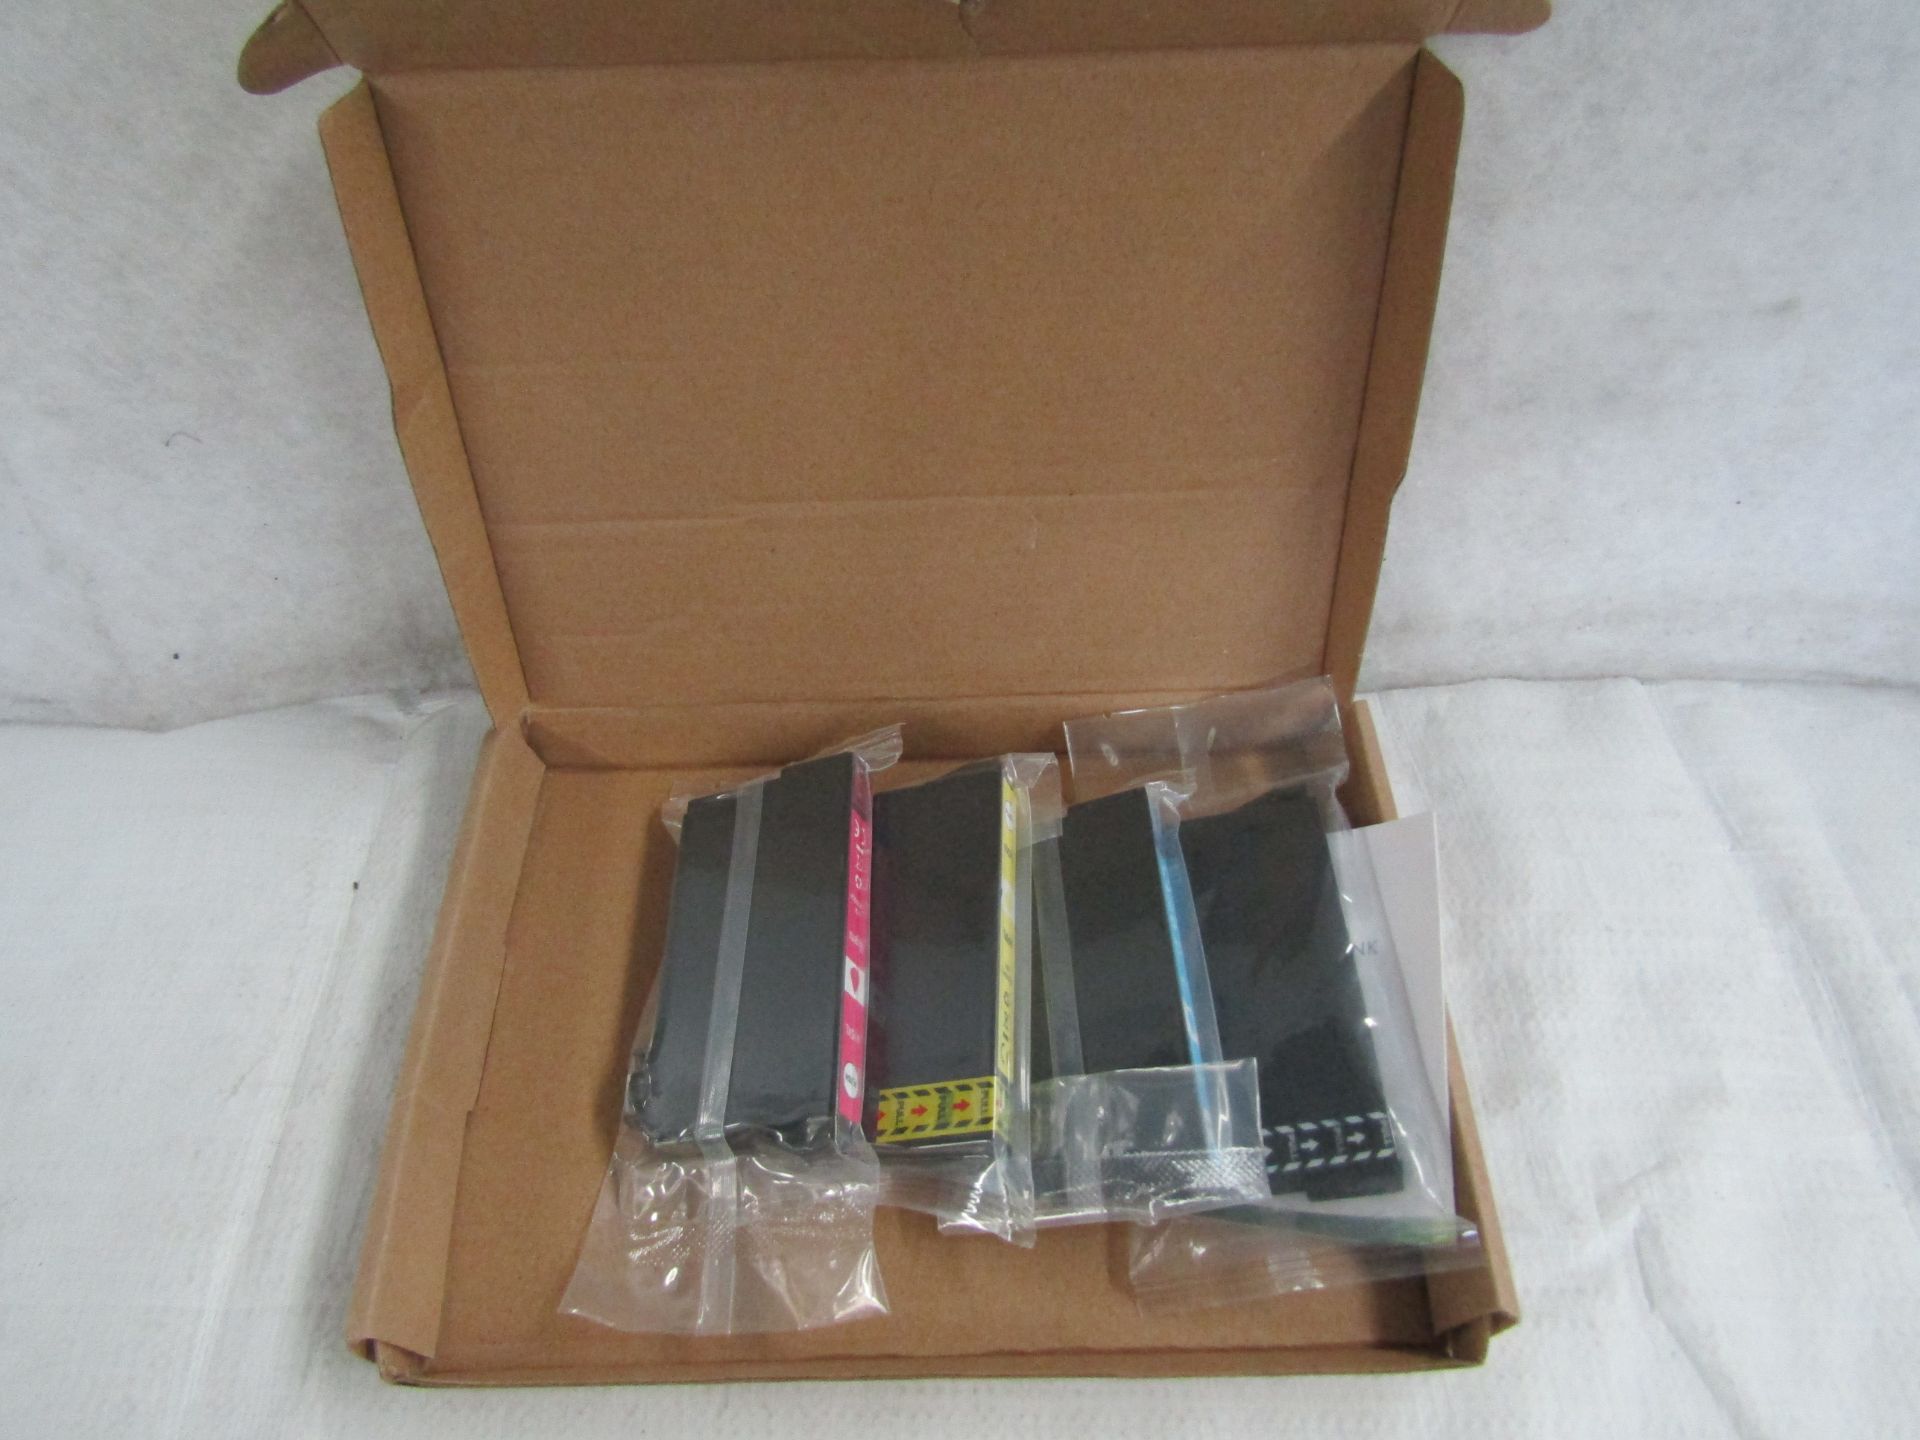 4x Compatiblr Ink Cartridges, Unchecked & Packaged.